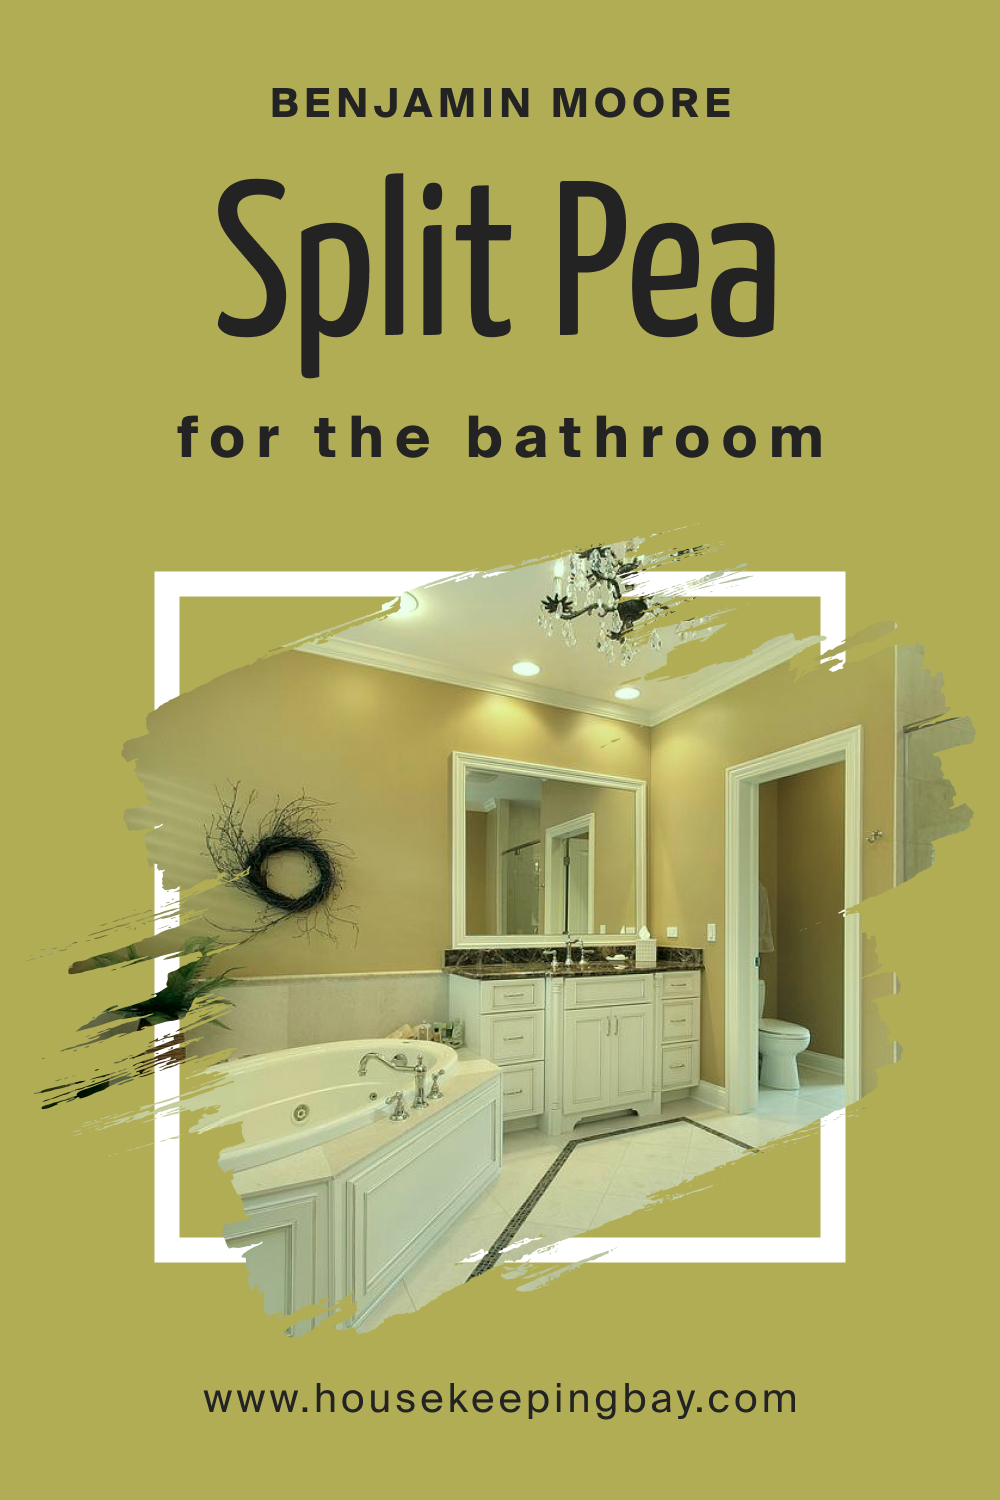 How to Use Split Pea 2146-30 in the Bathroom?